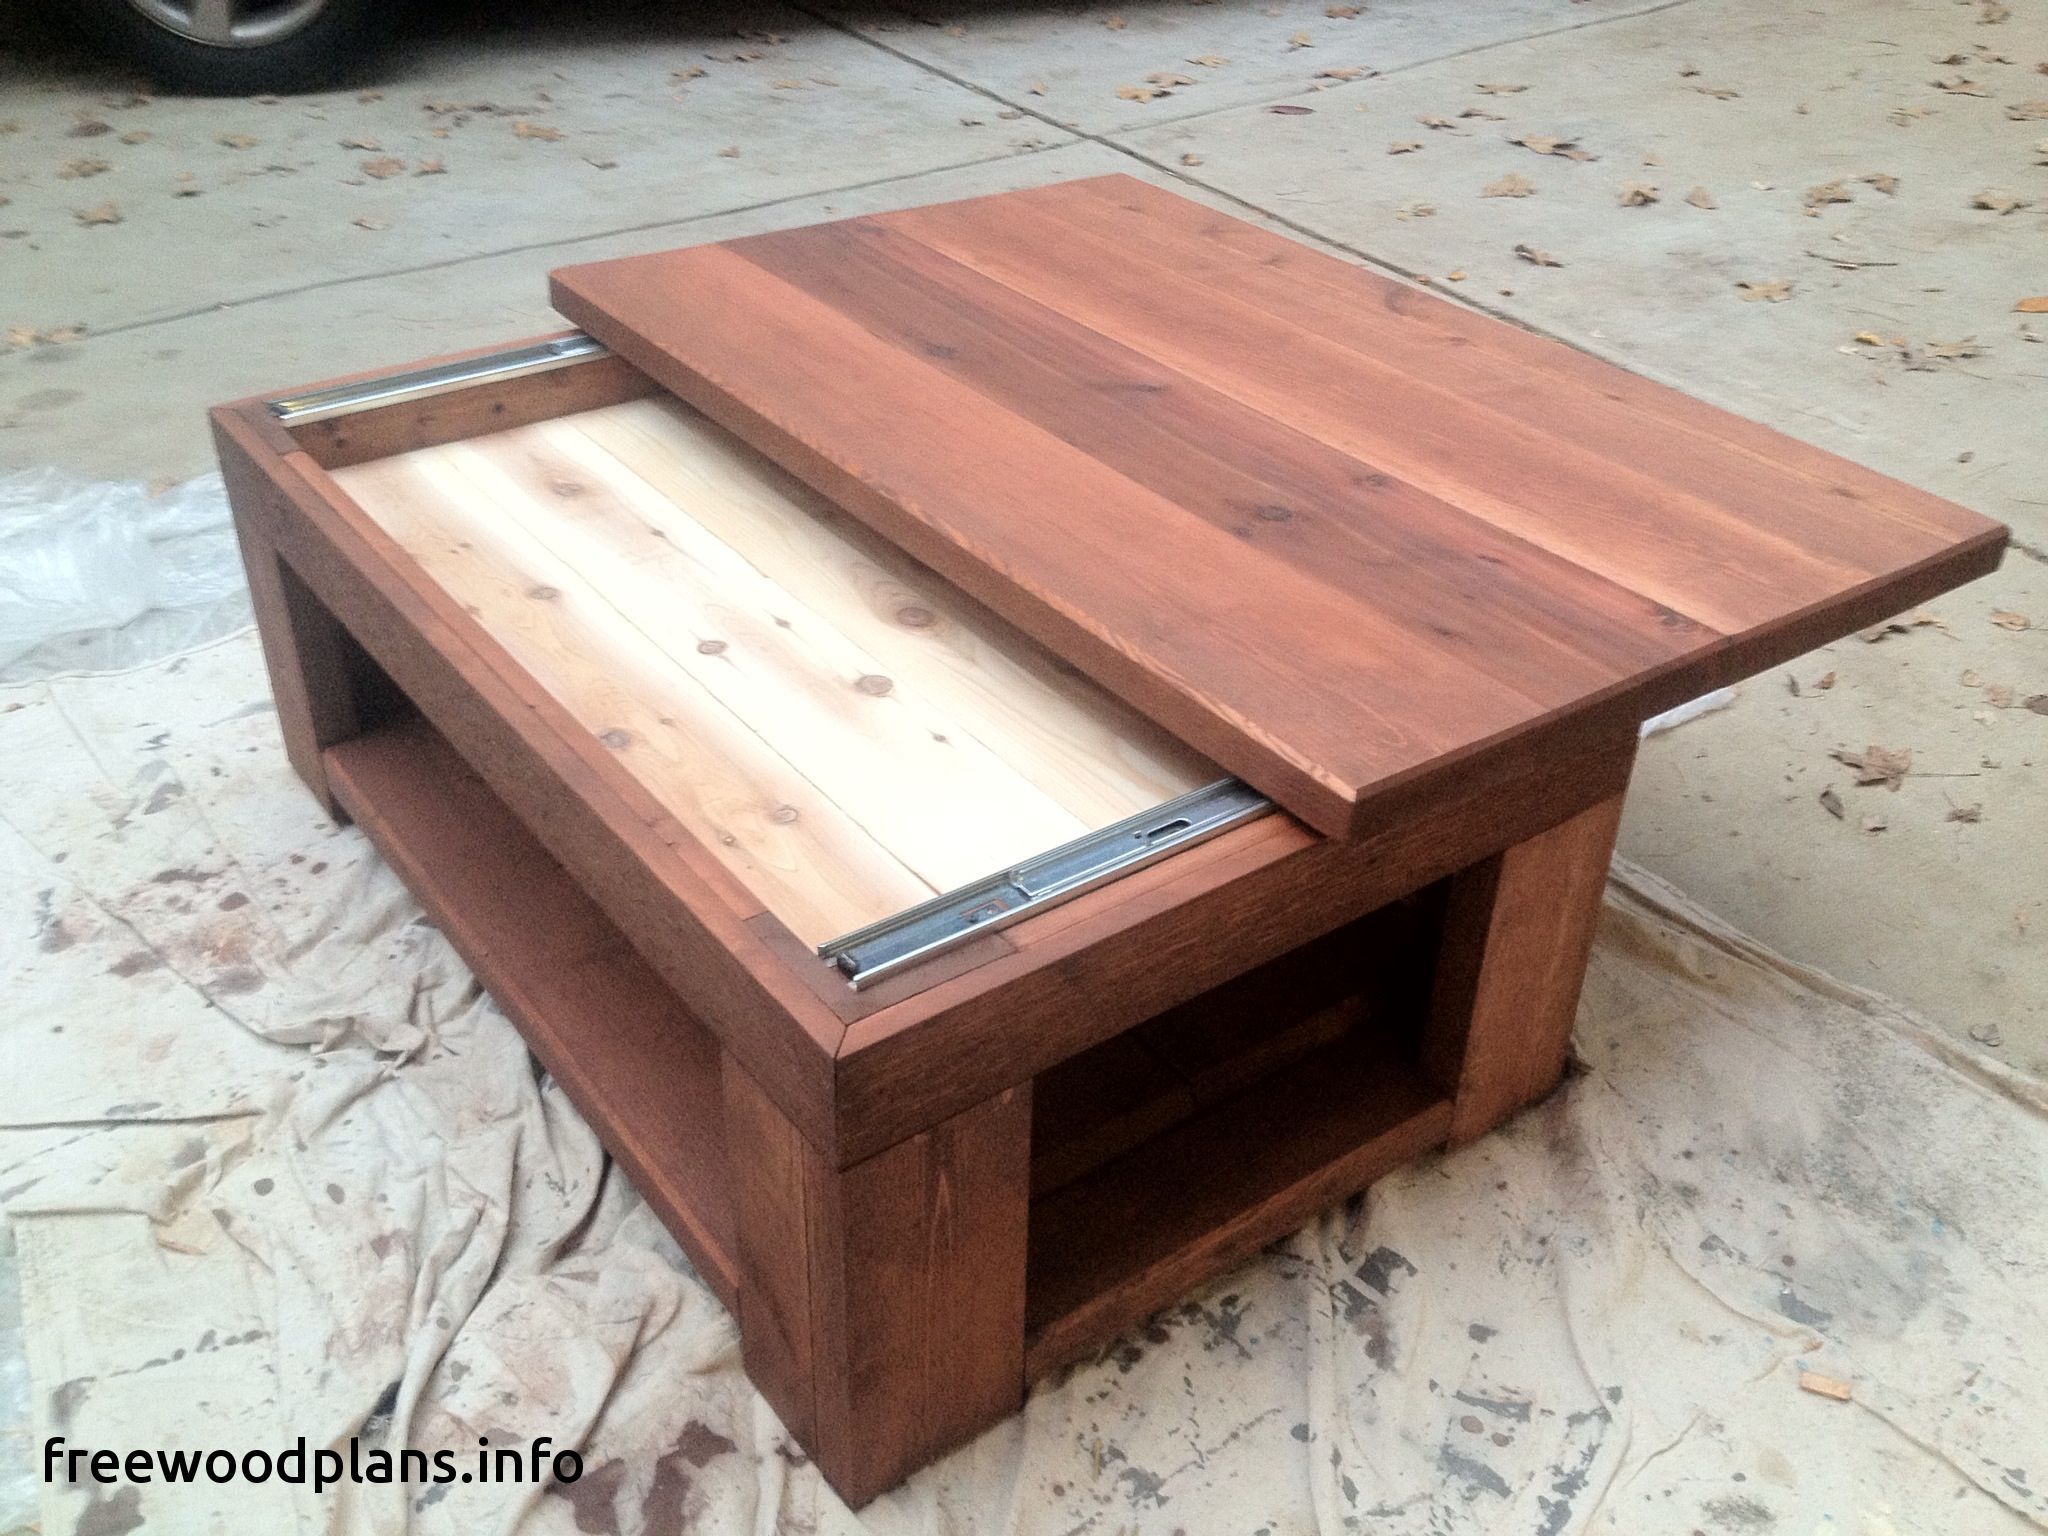 28 Woodworking Plans With Hidden Compartments 2019 | Coffee Table Inside Coffee Tables With Hidden Compartments (View 9 of 20)